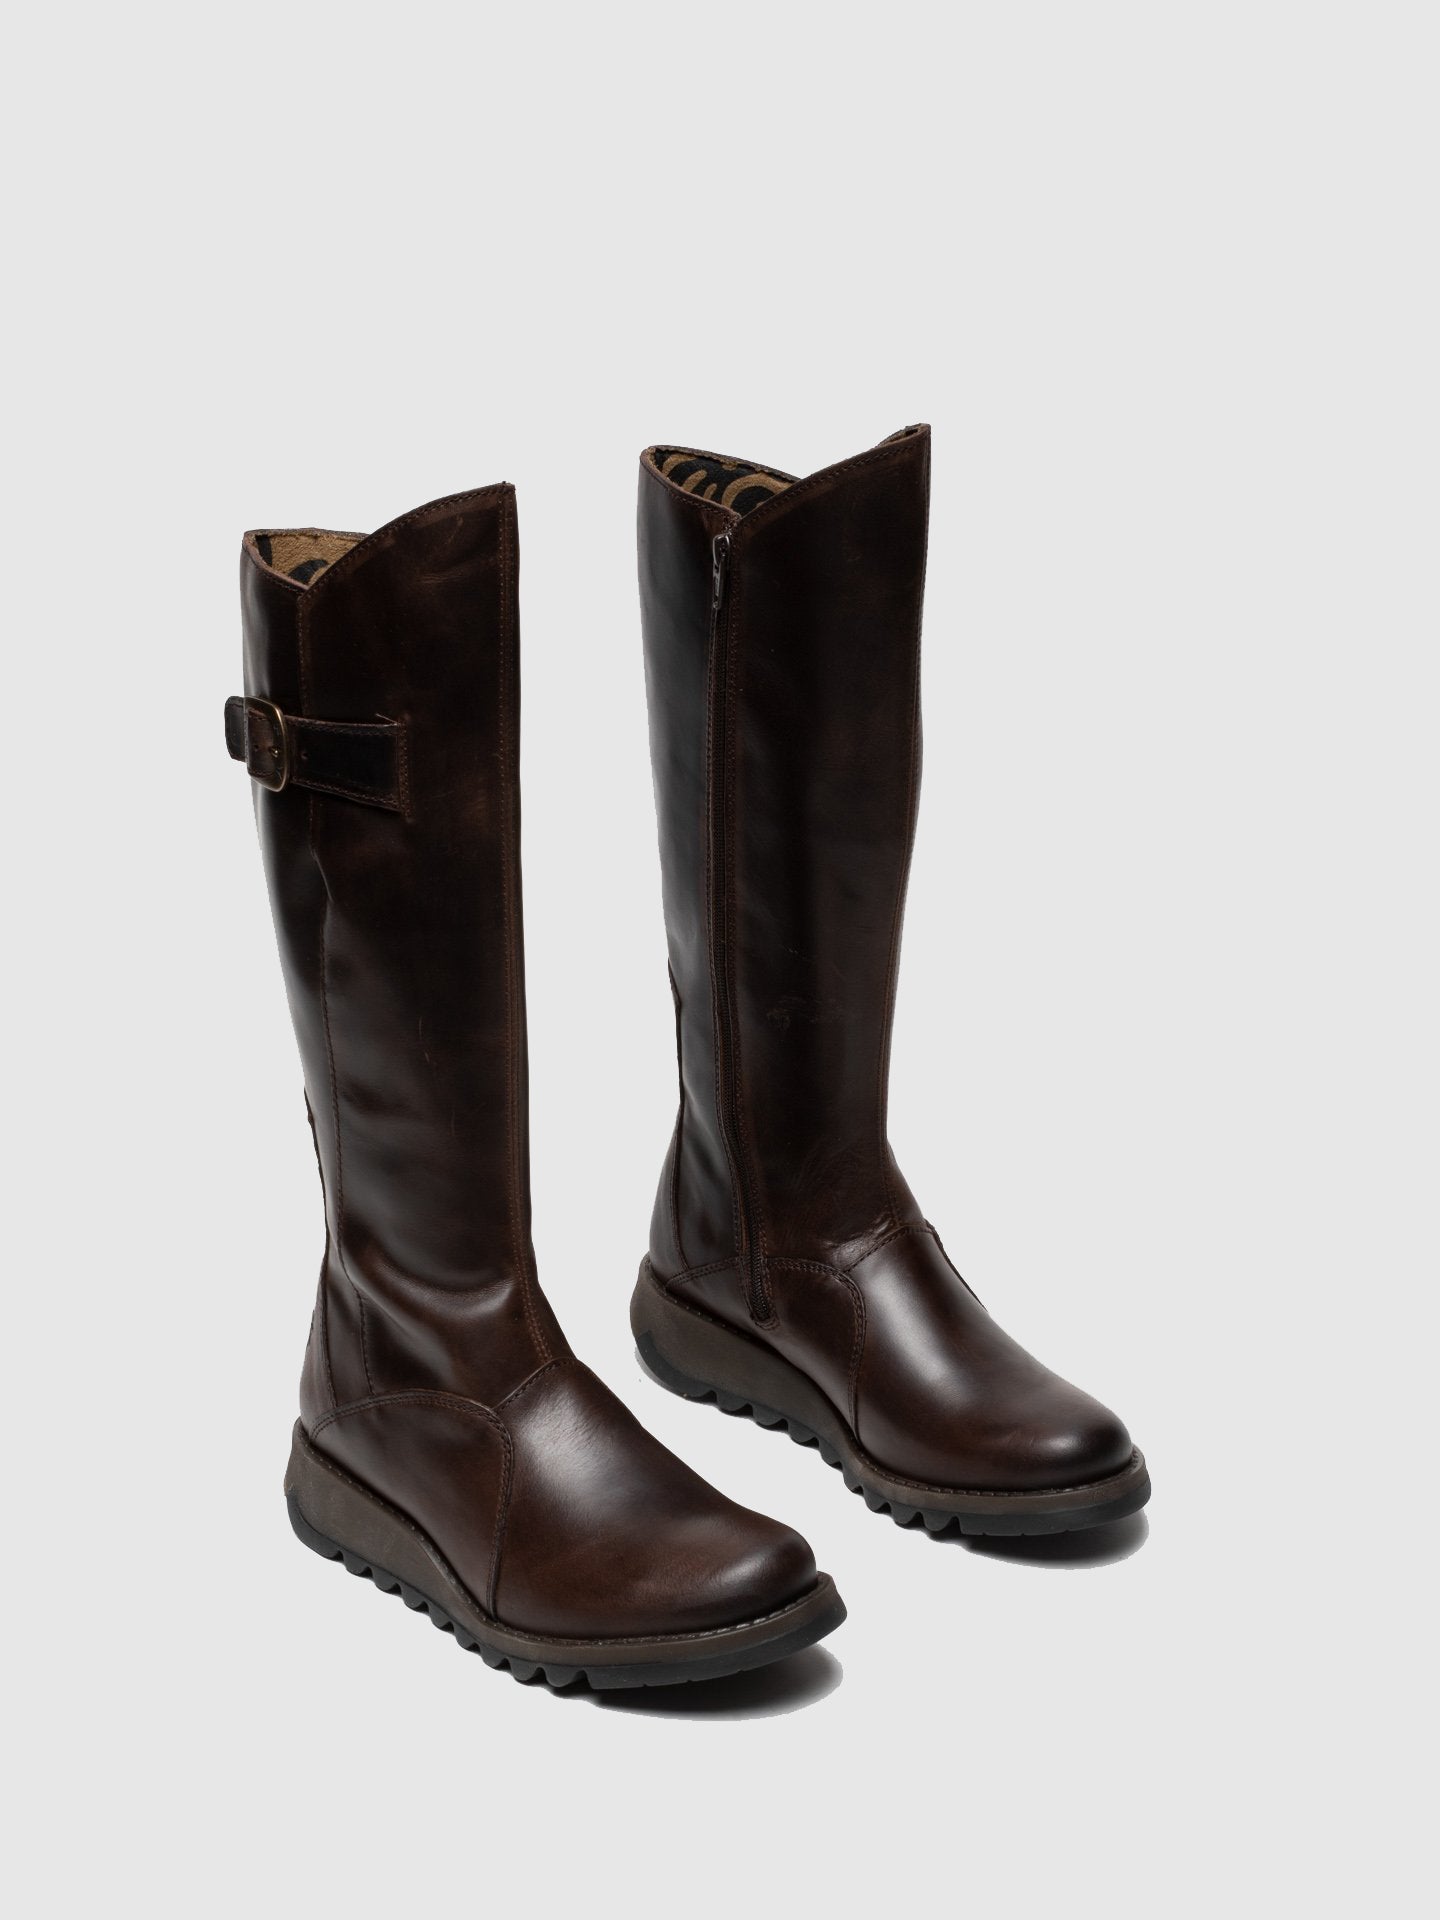 Fly London Brown Leather Zip Up Boots